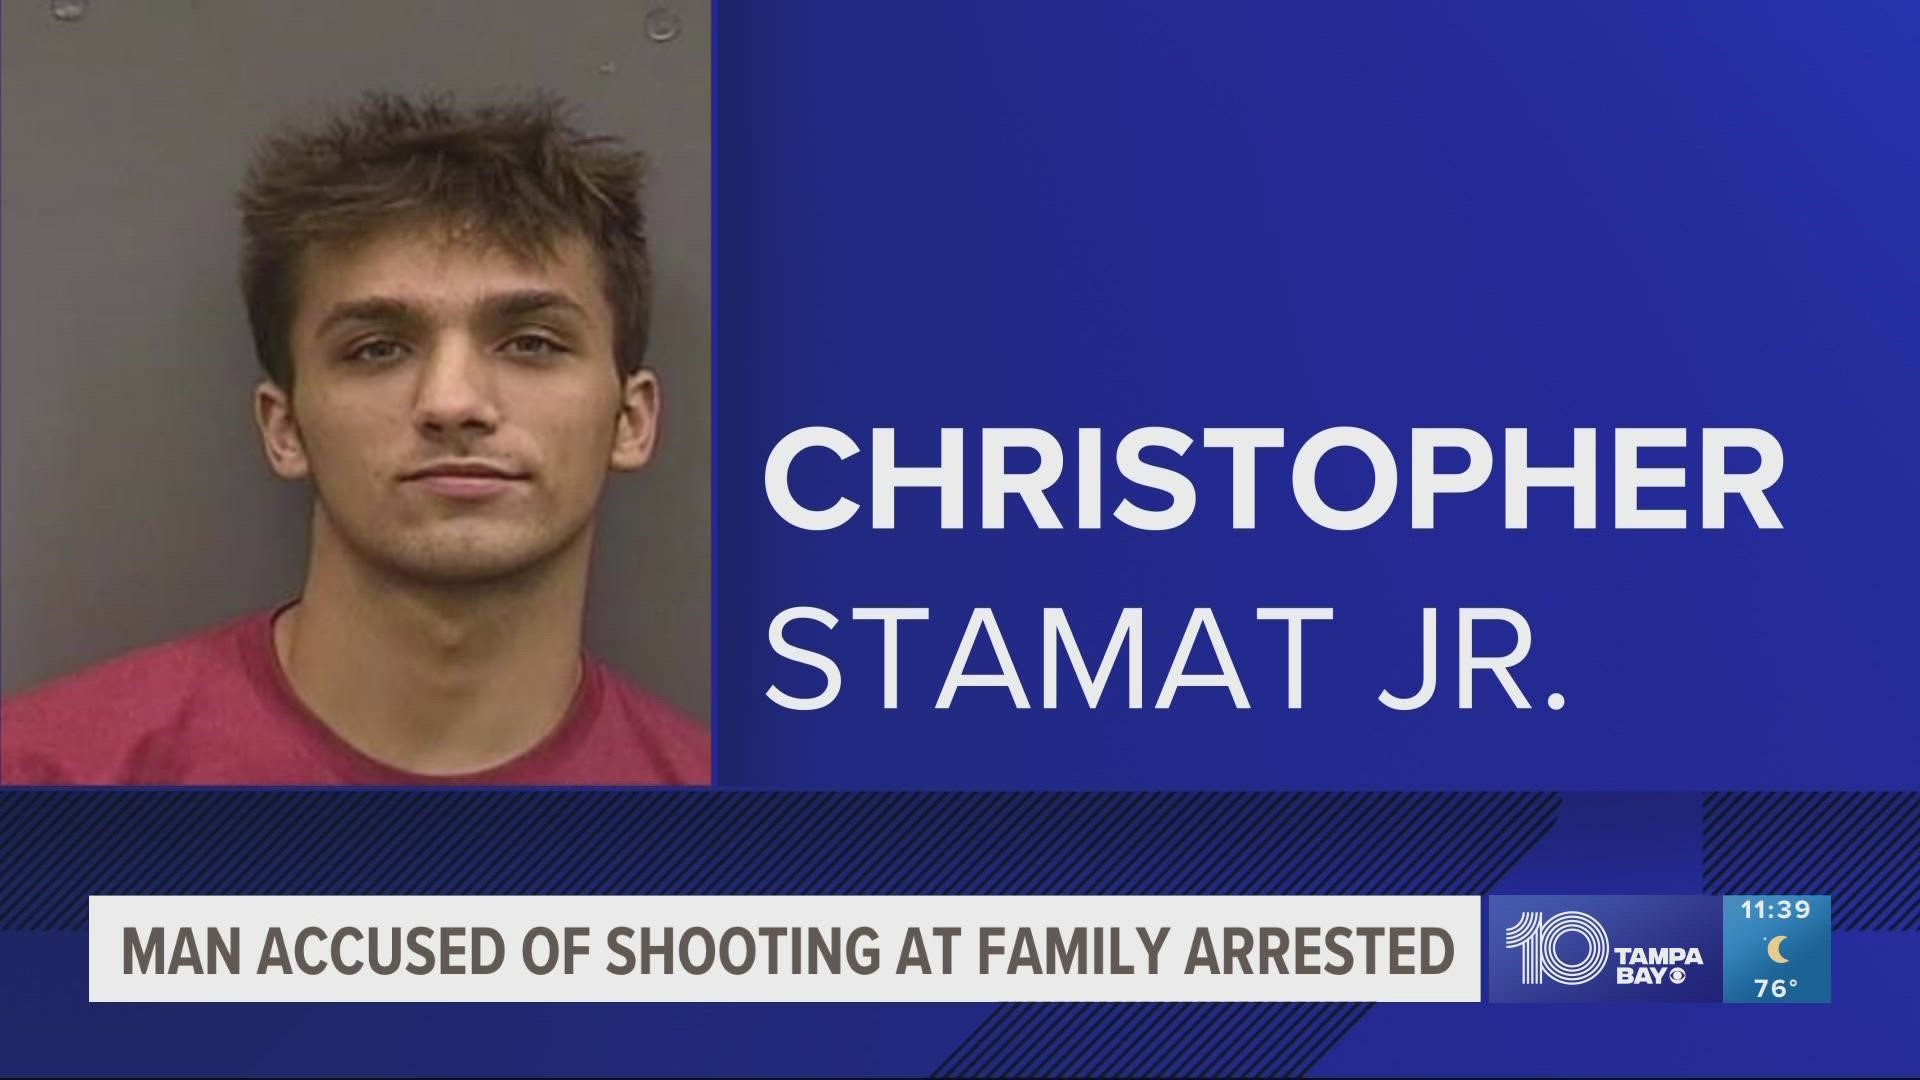 Christopher Stamat Jr. faces a charge of second-degree attempted murder.